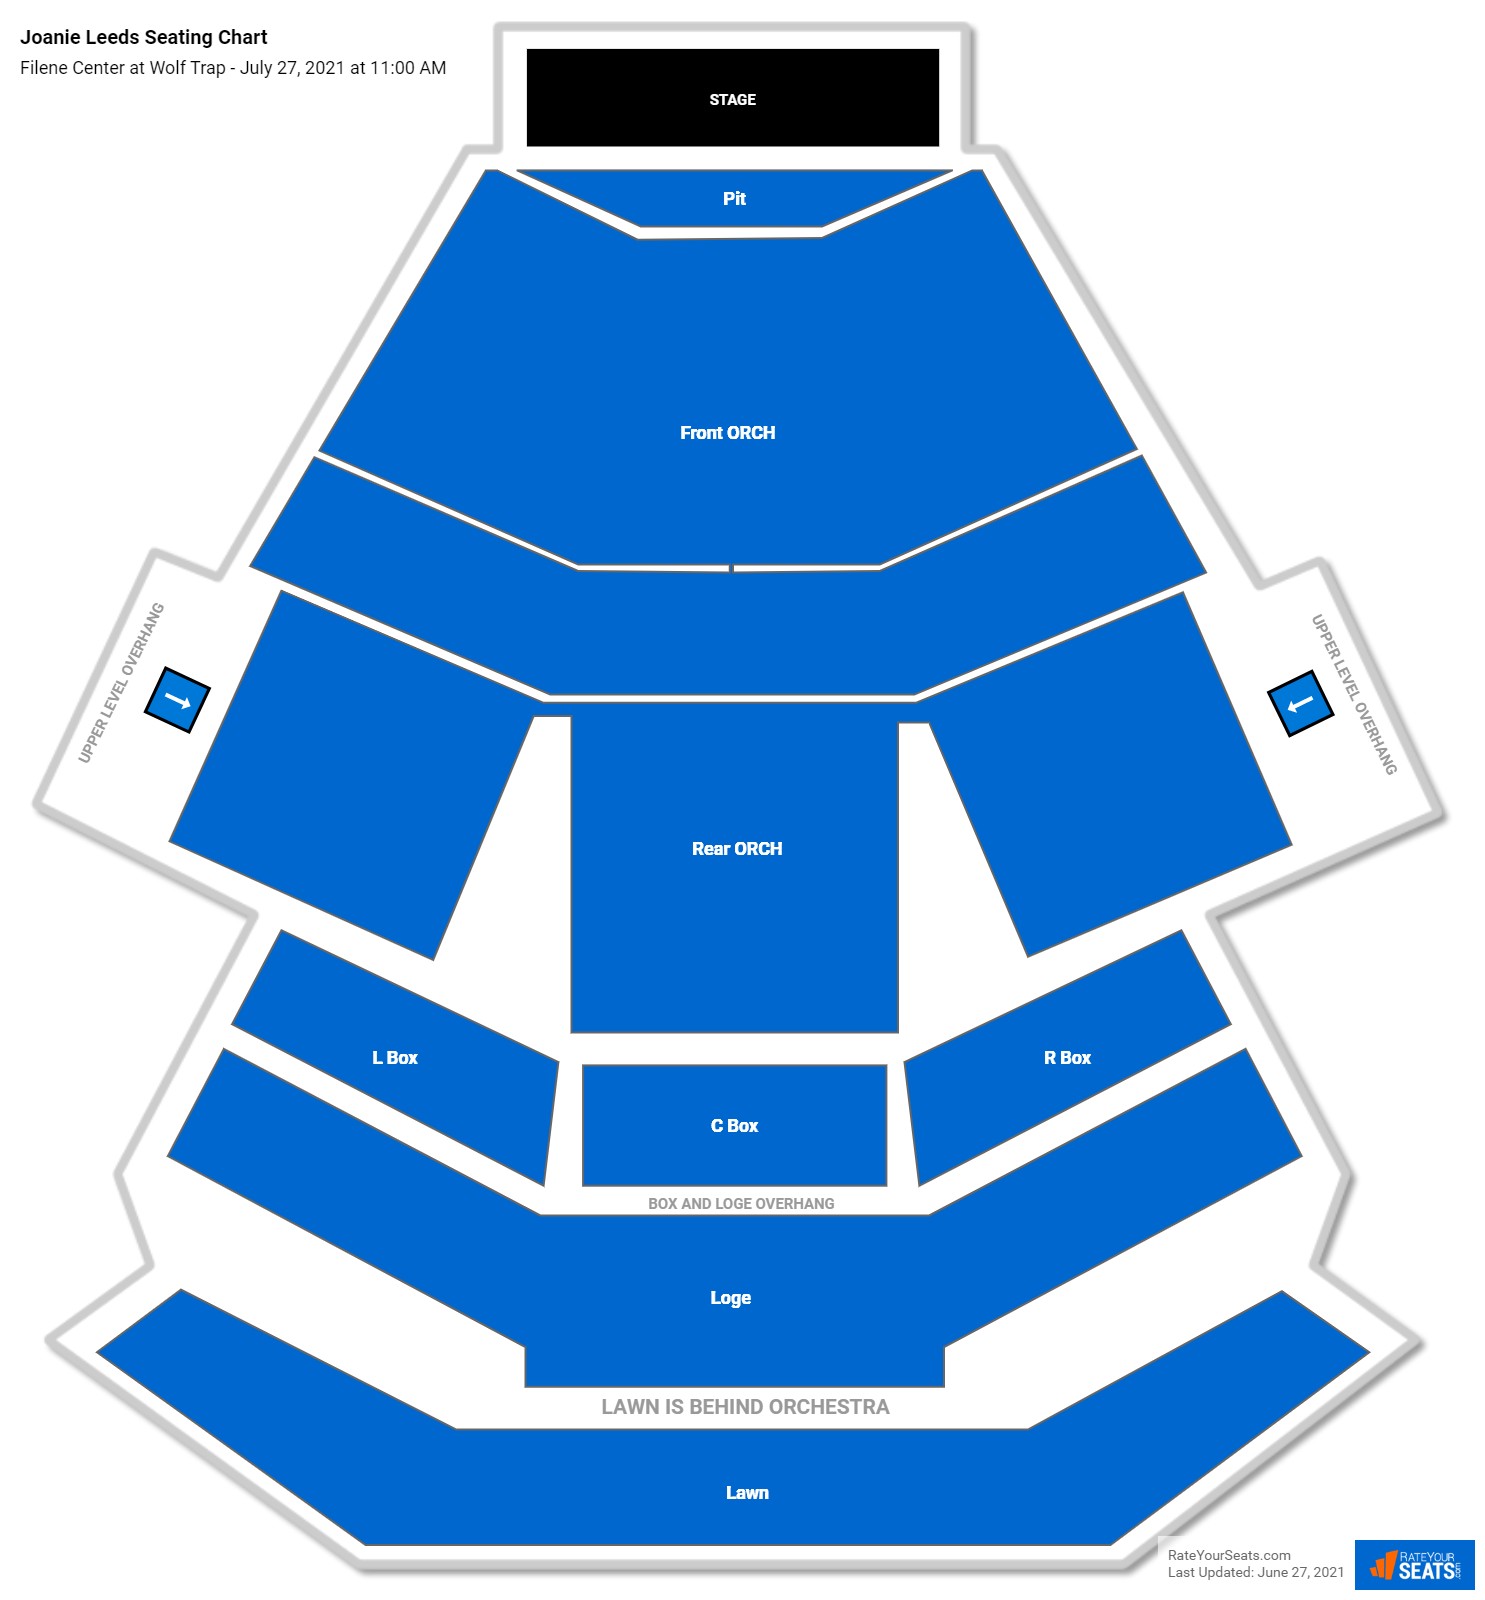 Filene Center at Wolf Trap Seating Chart